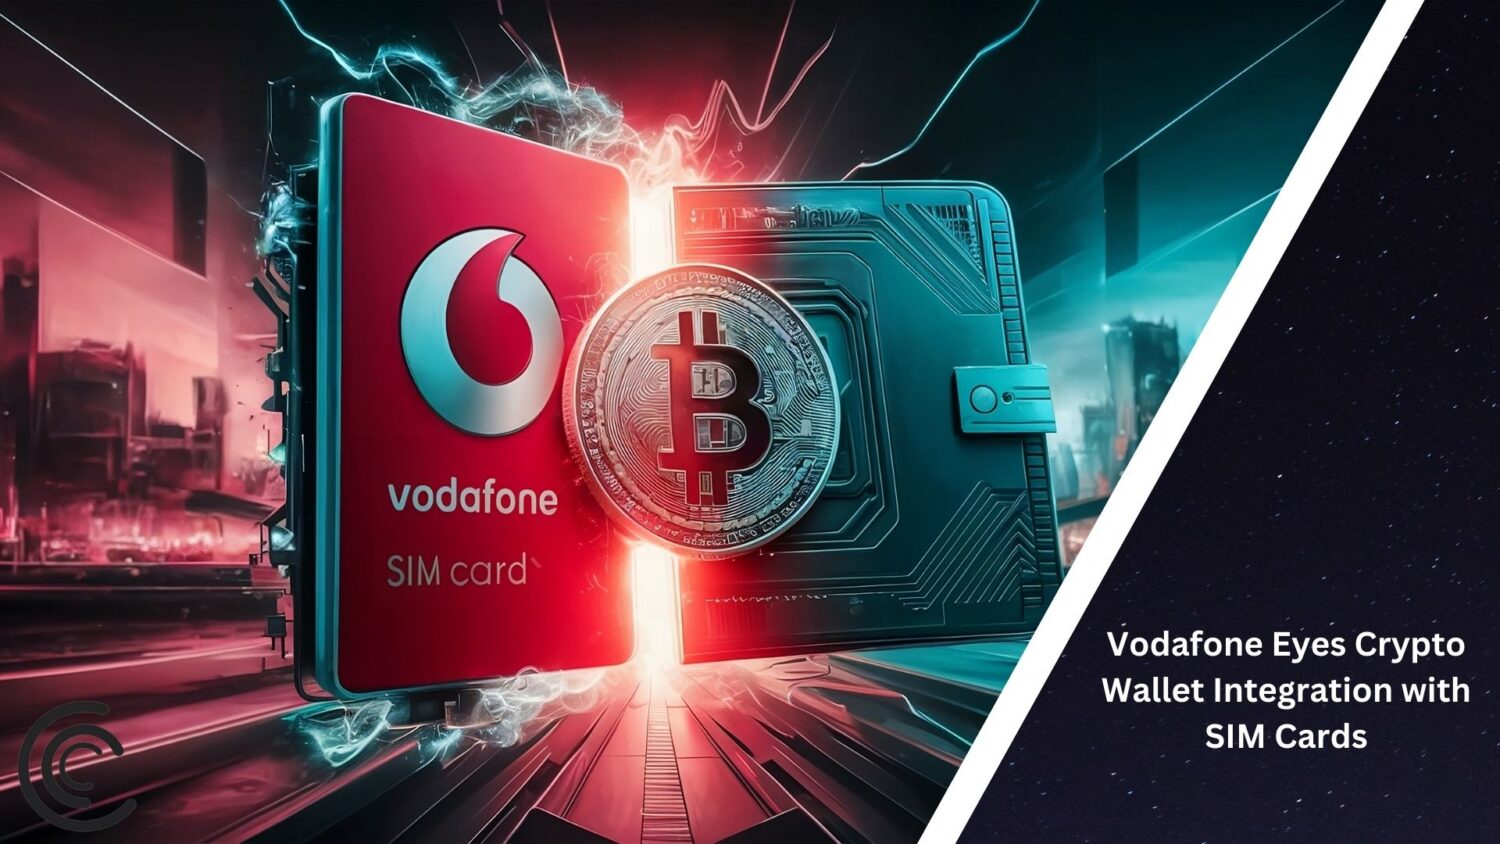 Vodafone Eyes Crypto Wallet Integration With Sim Cards